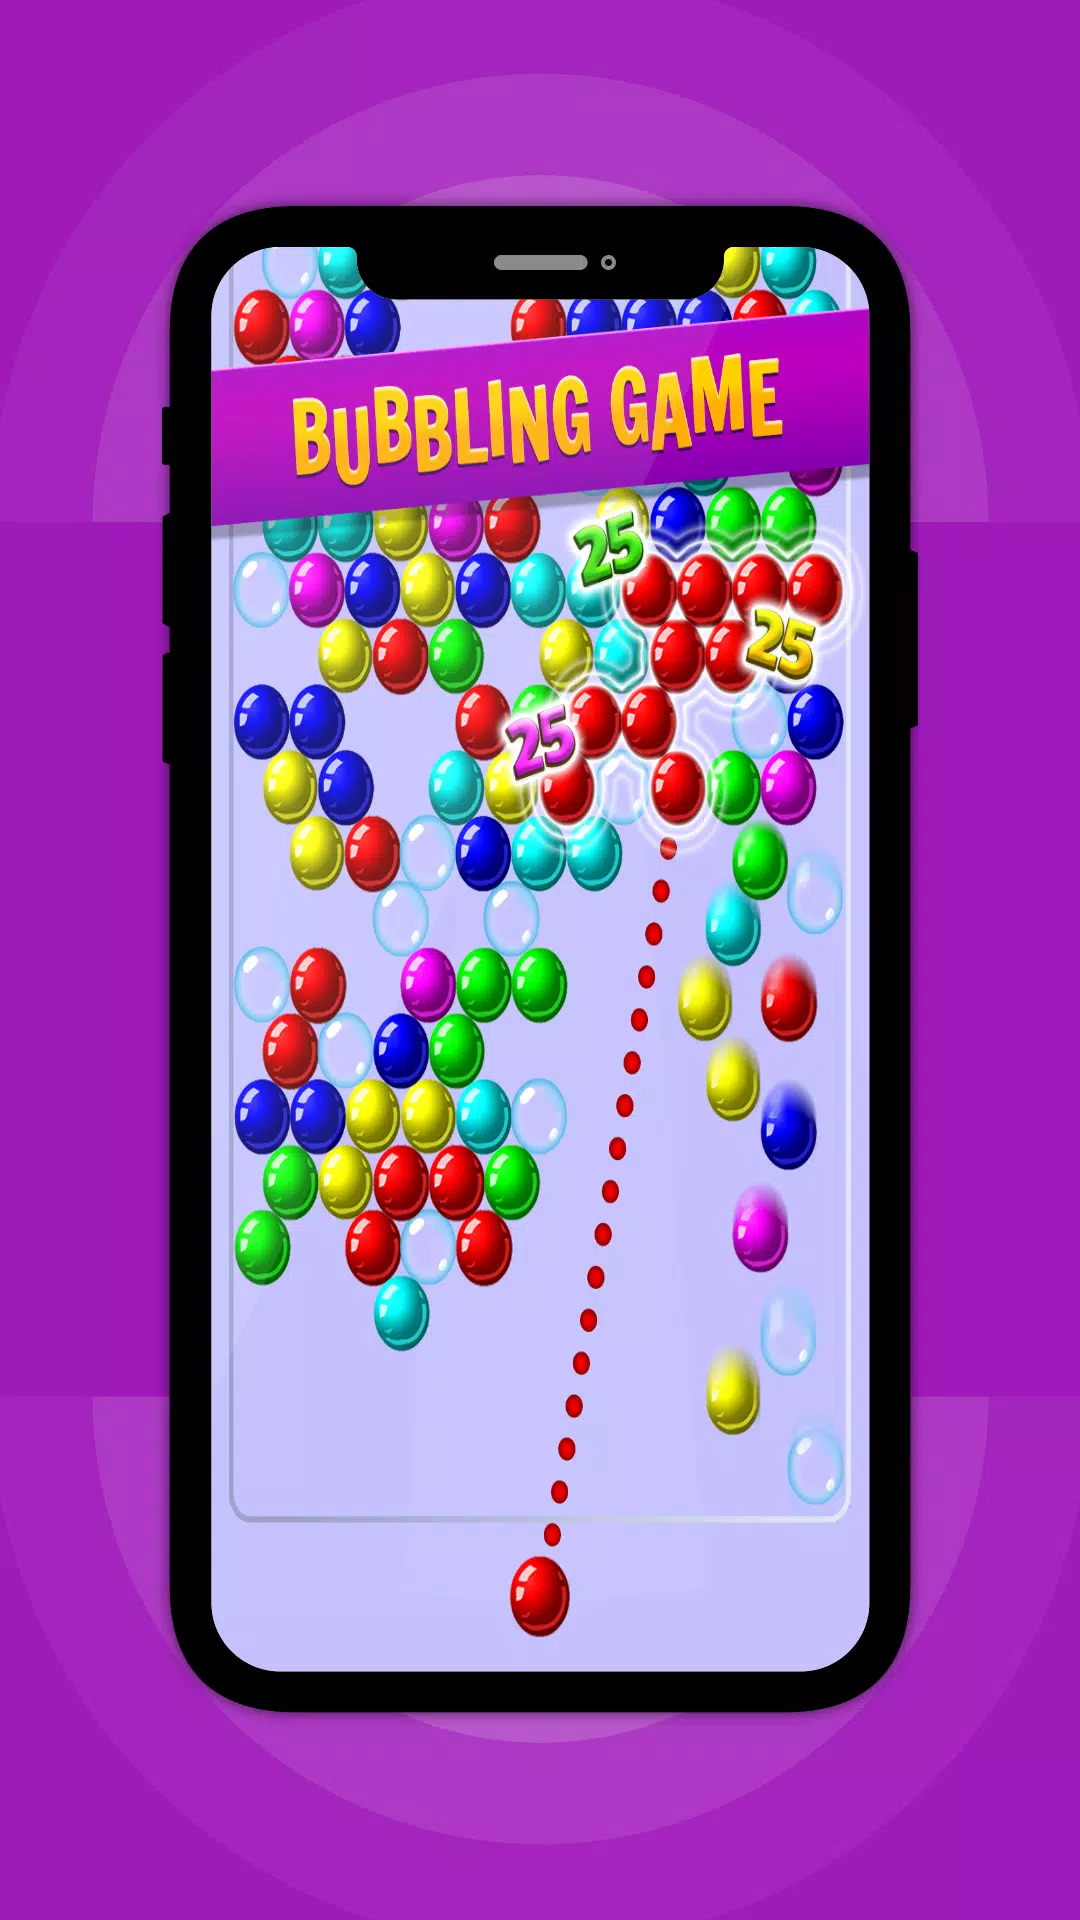 Bubble Shooter unblocked - 2019 for Android - APK Download